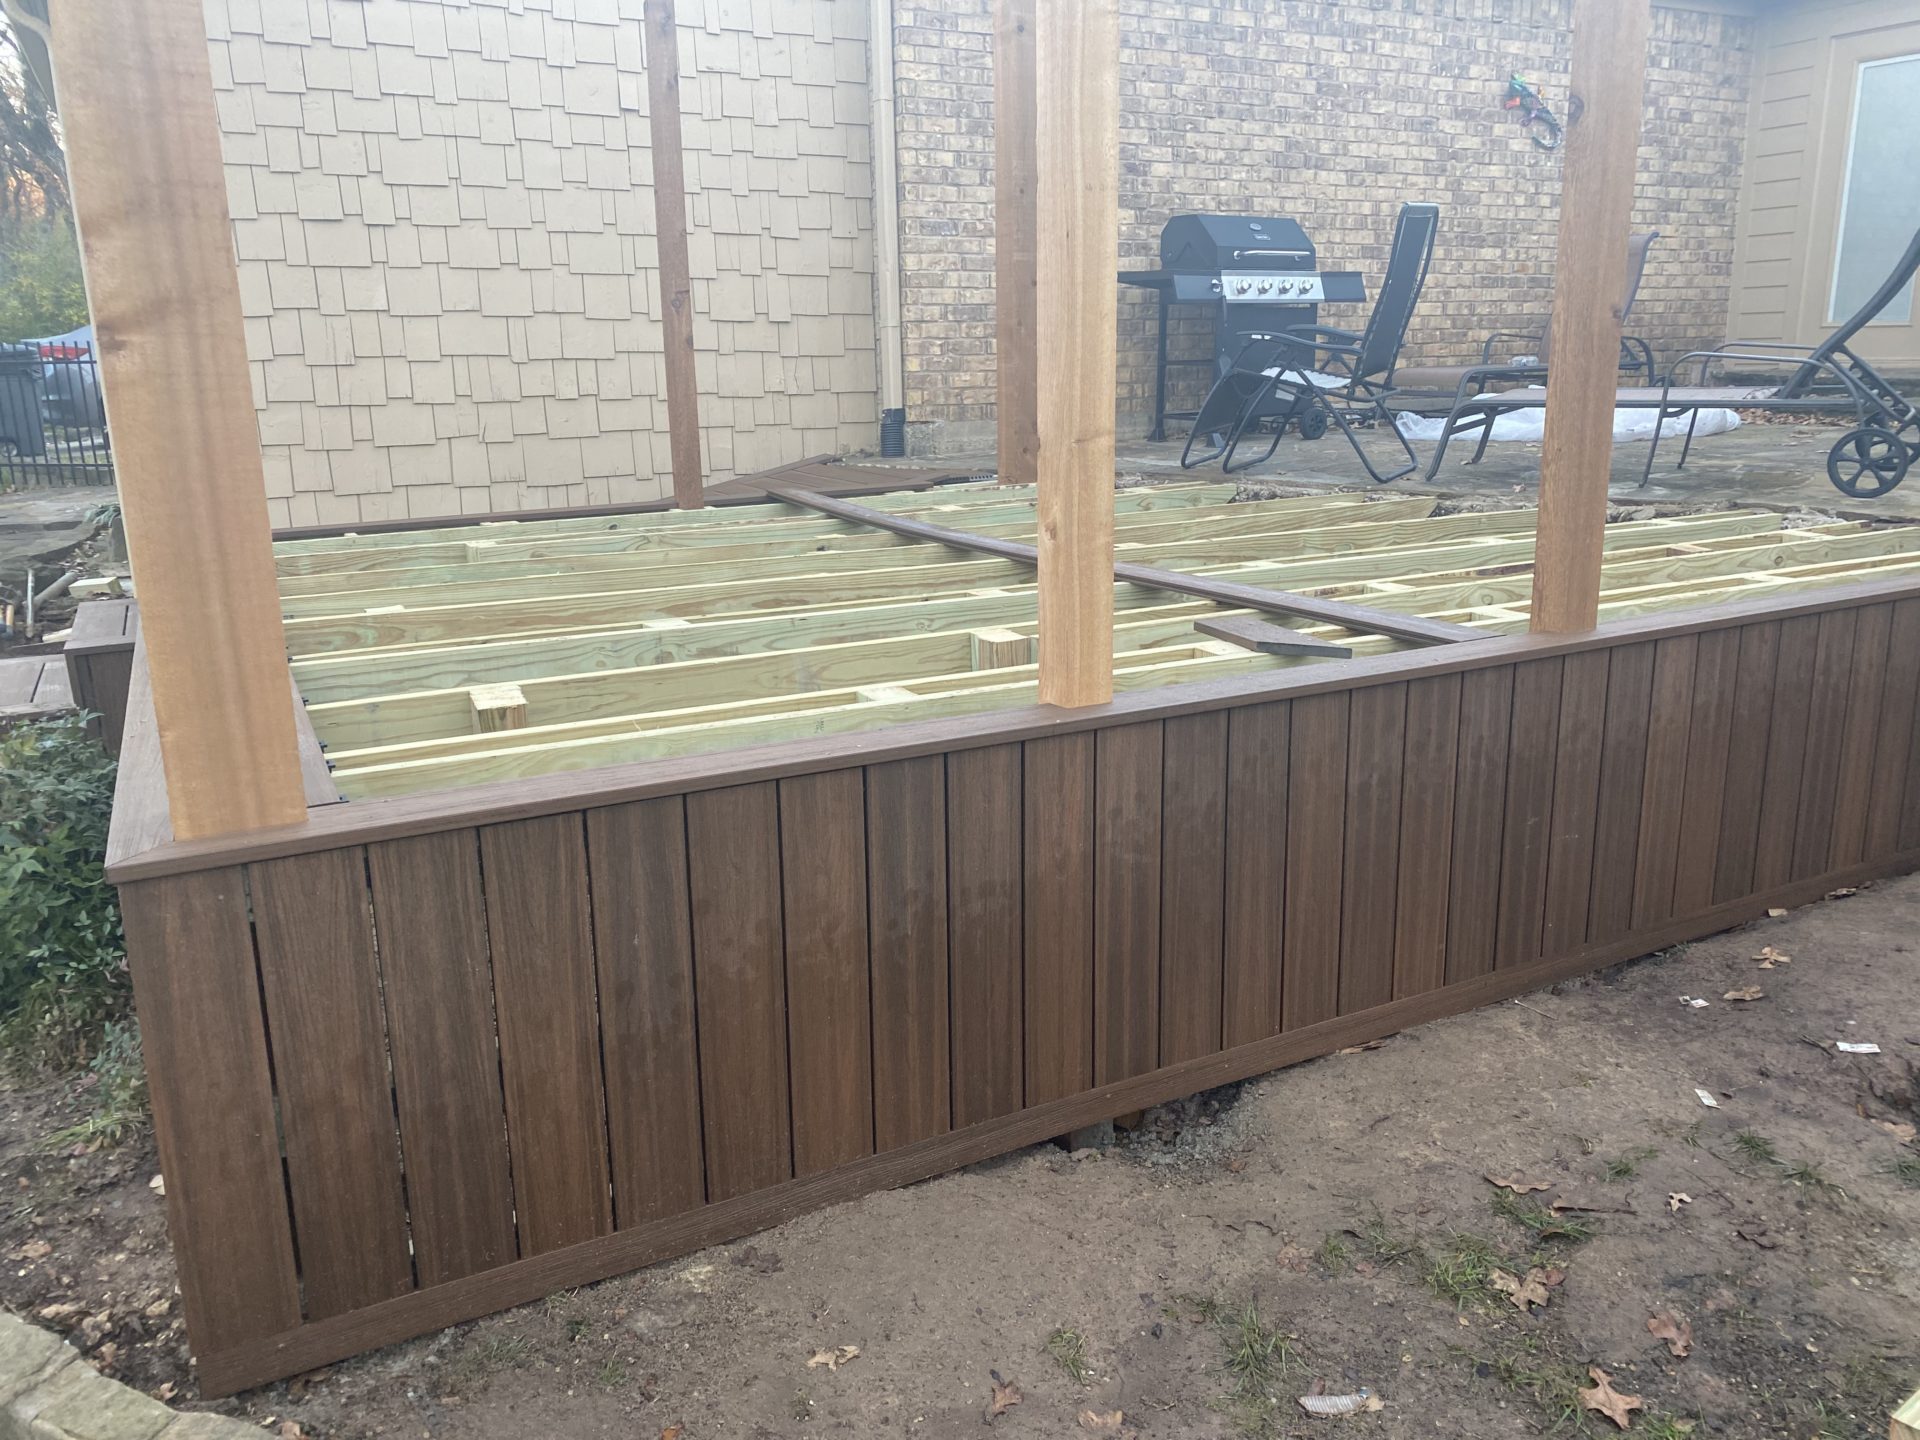 Backyard of a home in Hurst, TX with new patio deck under construction. Patio deck siding is completed and deck is being worked on.